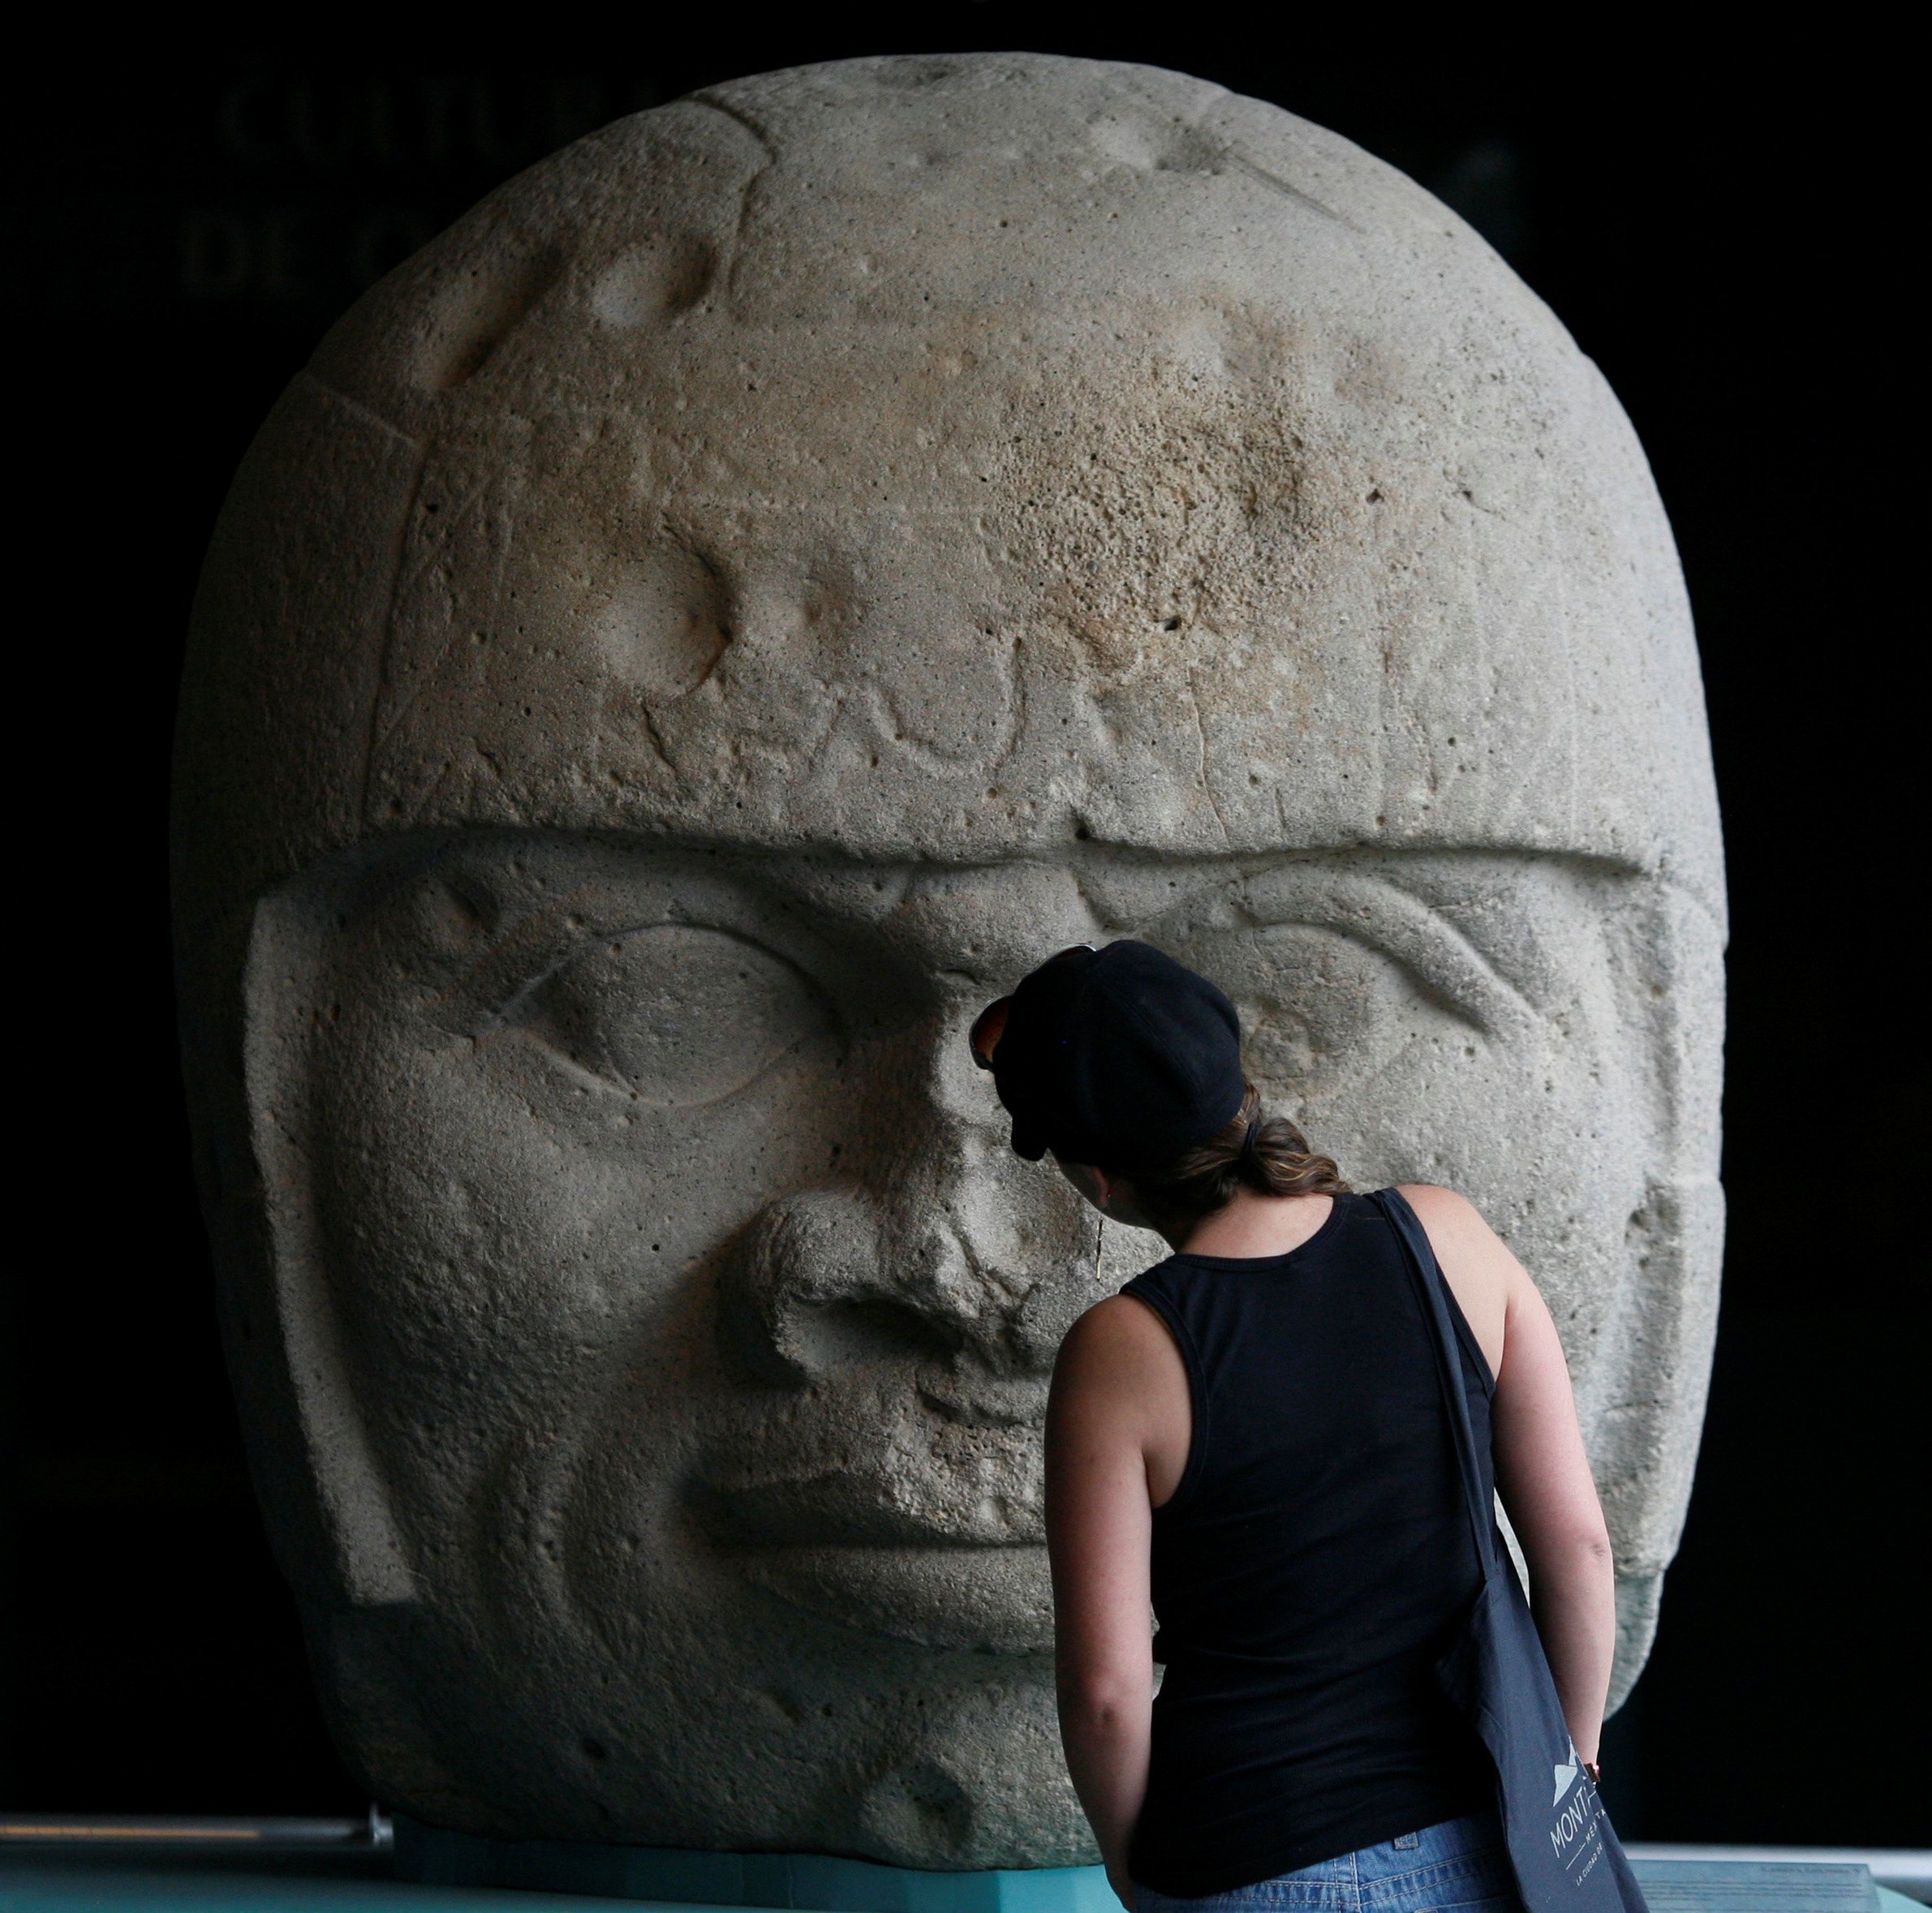 A visitor looks at an Olmec colossal head during the preview of 'Colossal masterworks of the Olmec world' exhibition at the Anthropology Museum in Mexico City, Mexico, July 20, 2011. (Reuters Photo)